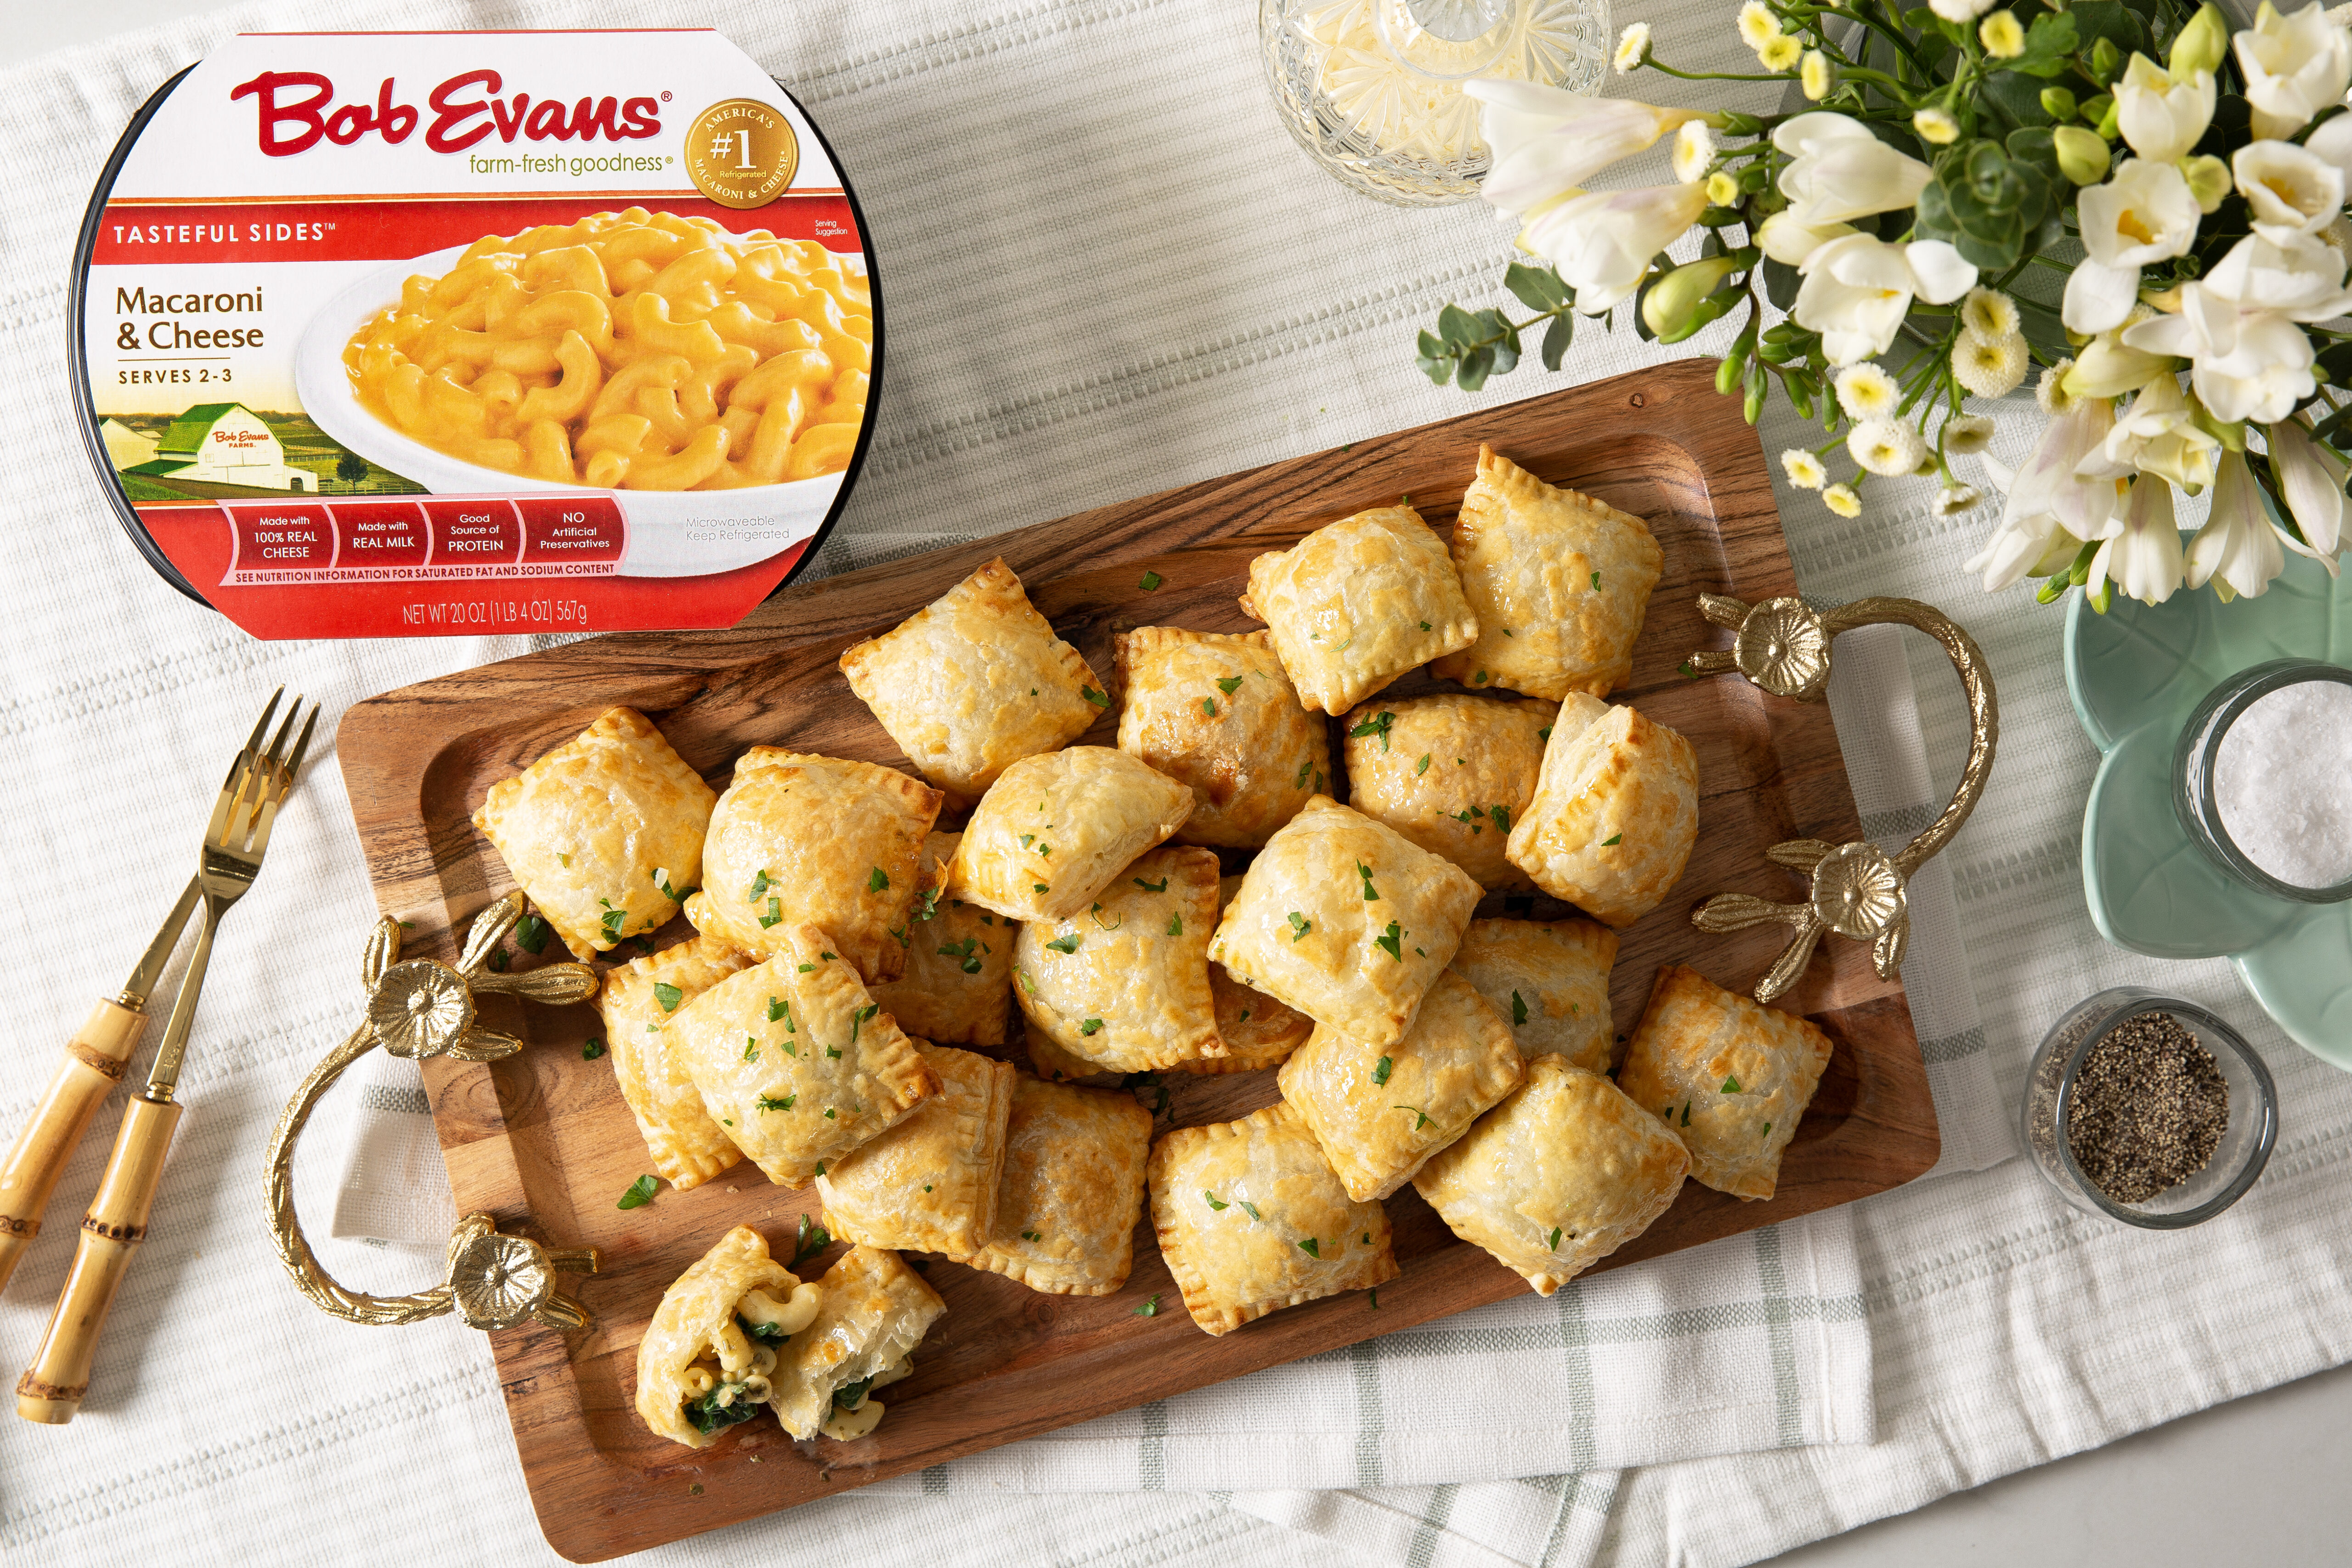 a tray of spinach-pesto macaroni & cheese bites next to a package of Bob Evans Macaroni & Cheese